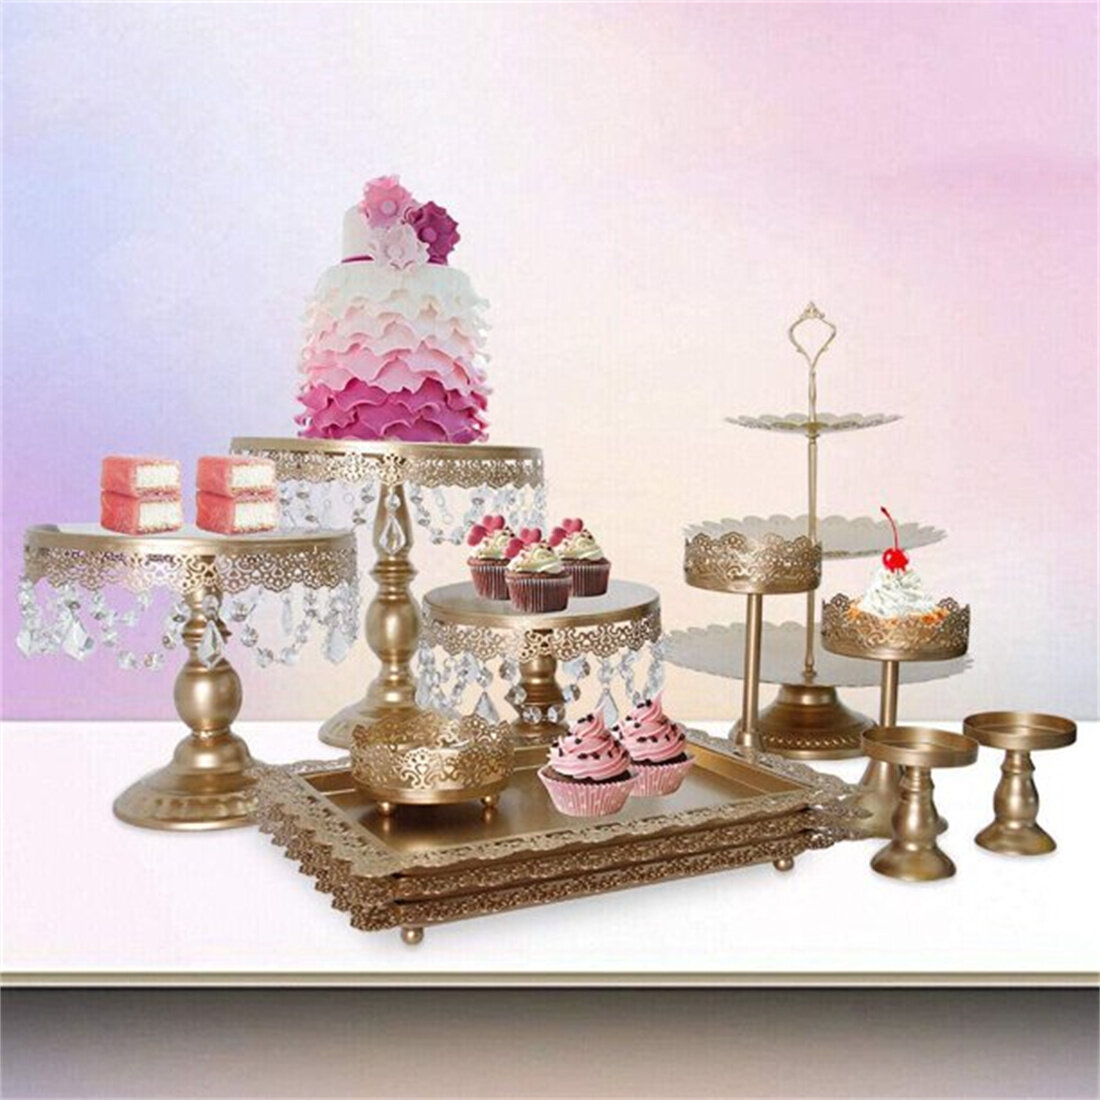 12" Blue Stainless Steel Cake Stand Cupcake Display Tray Holder Wedding Party 